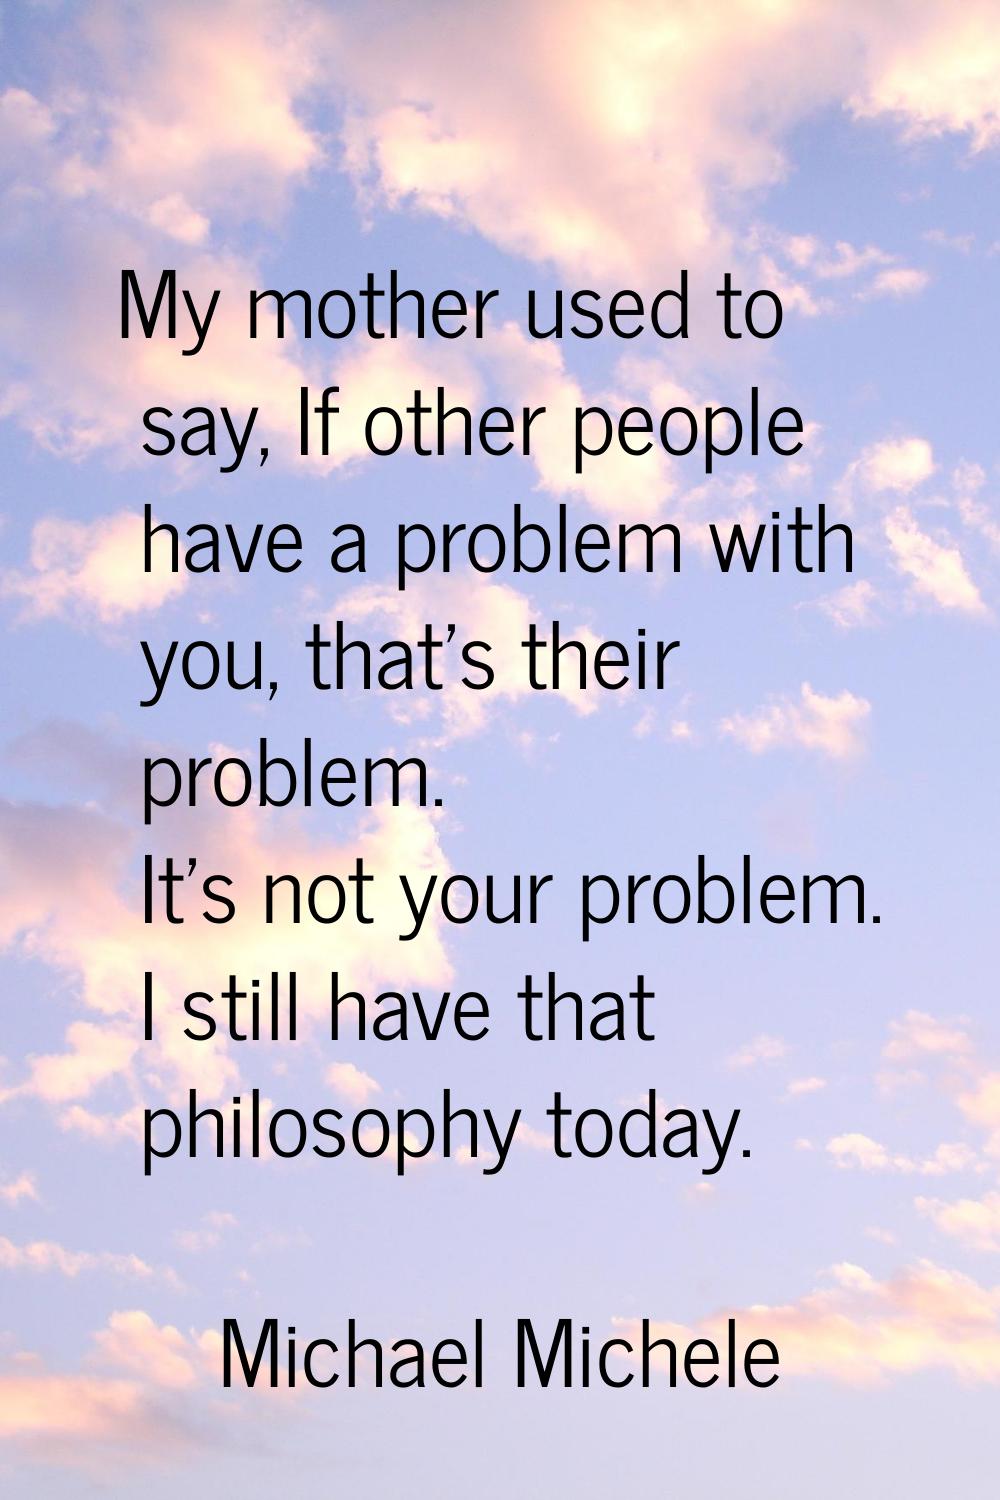 My mother used to say, If other people have a problem with you, that's their problem. It's not your